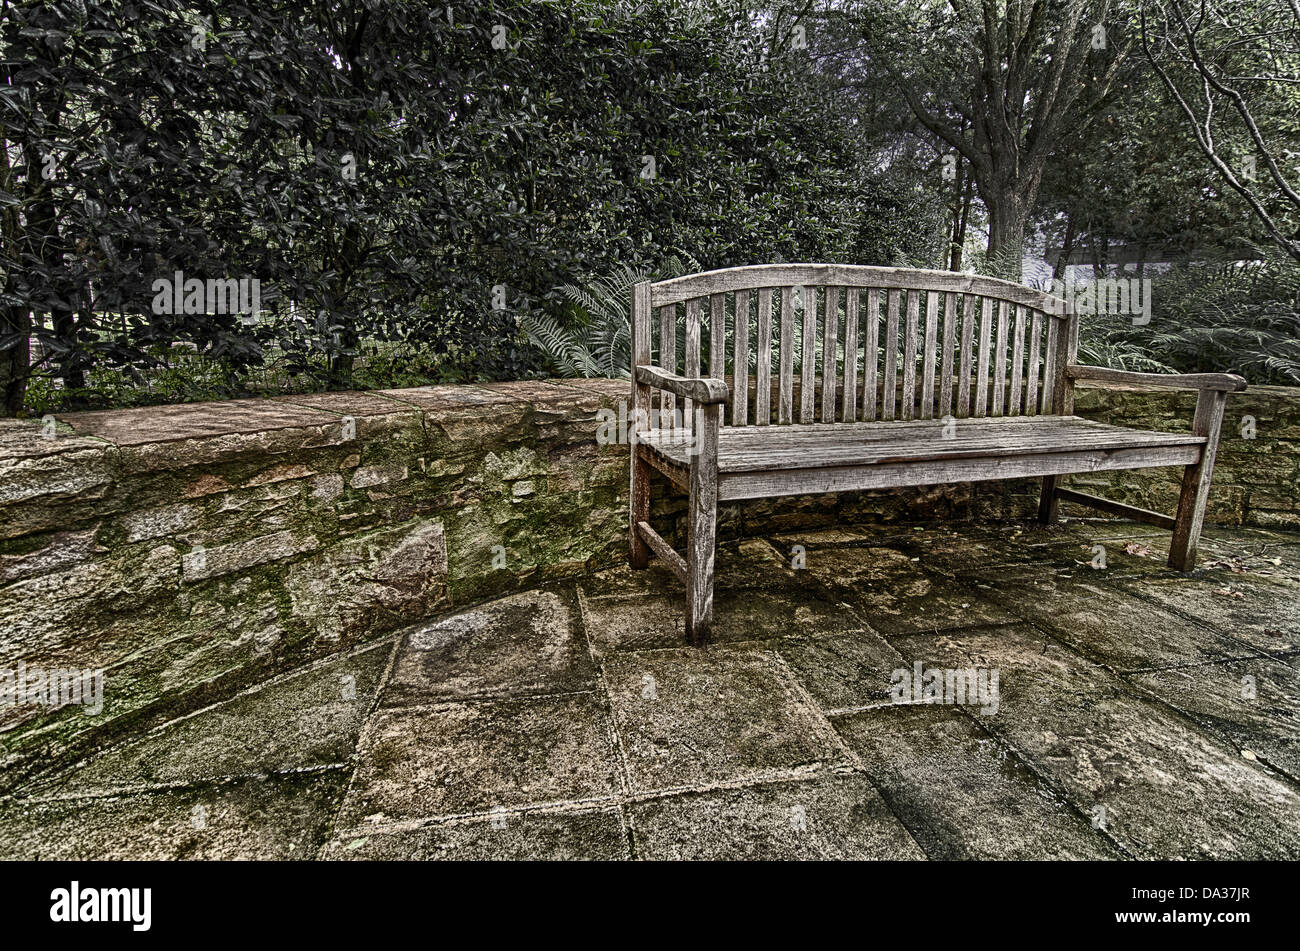 This image is a wooden bench in a garden. Stock Photo